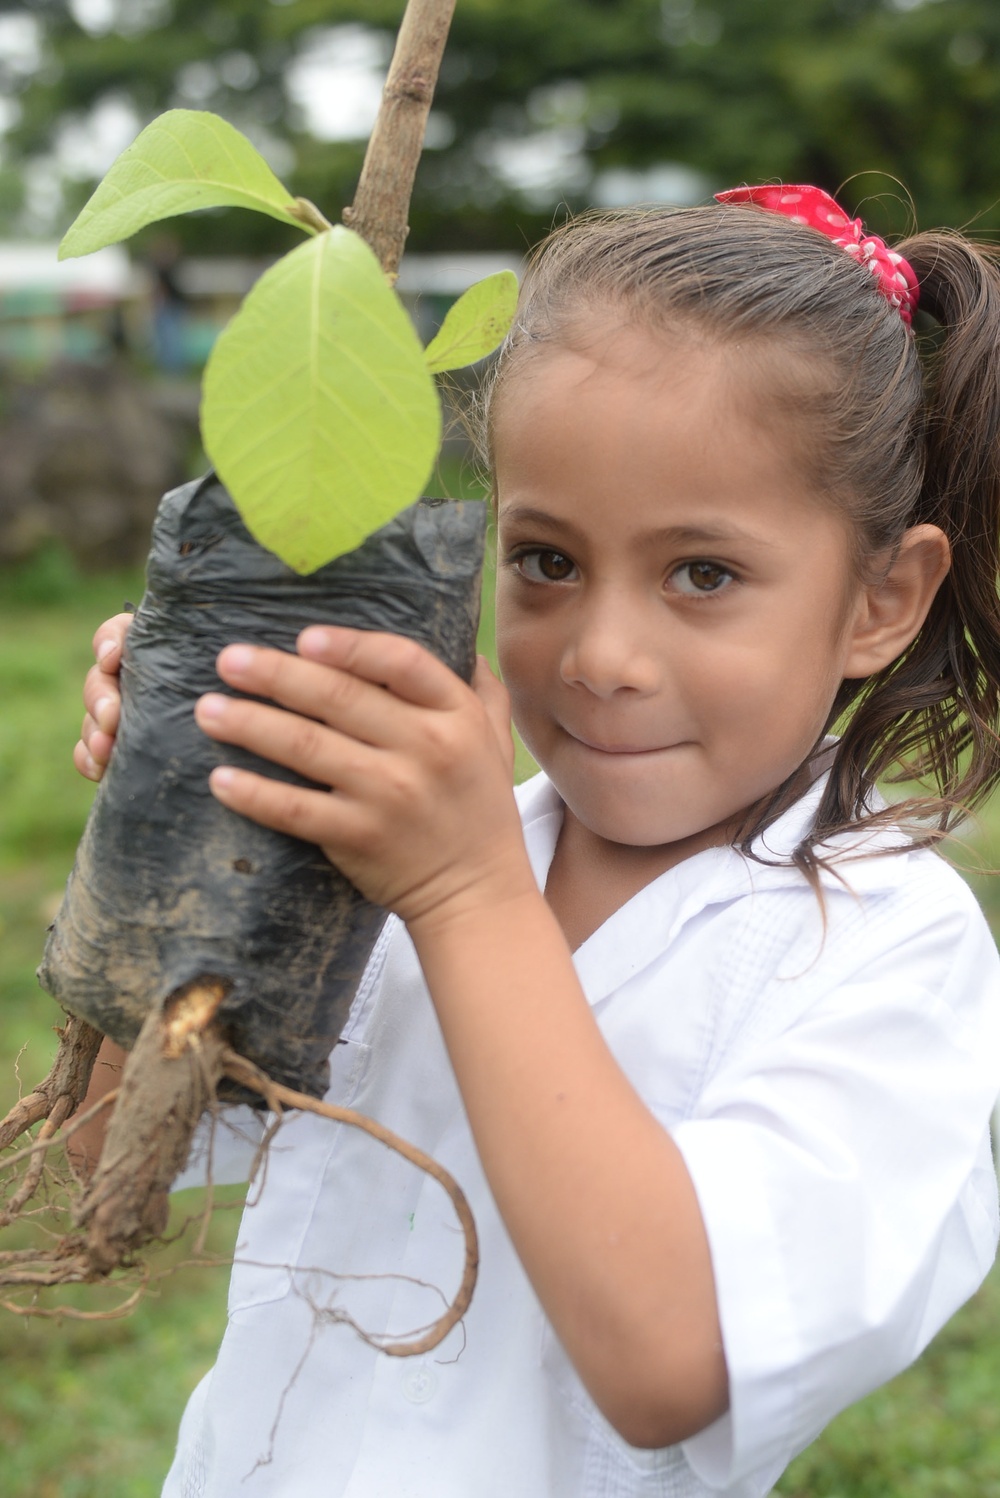 National Tree Day brings out New Horizons volunteers to local school